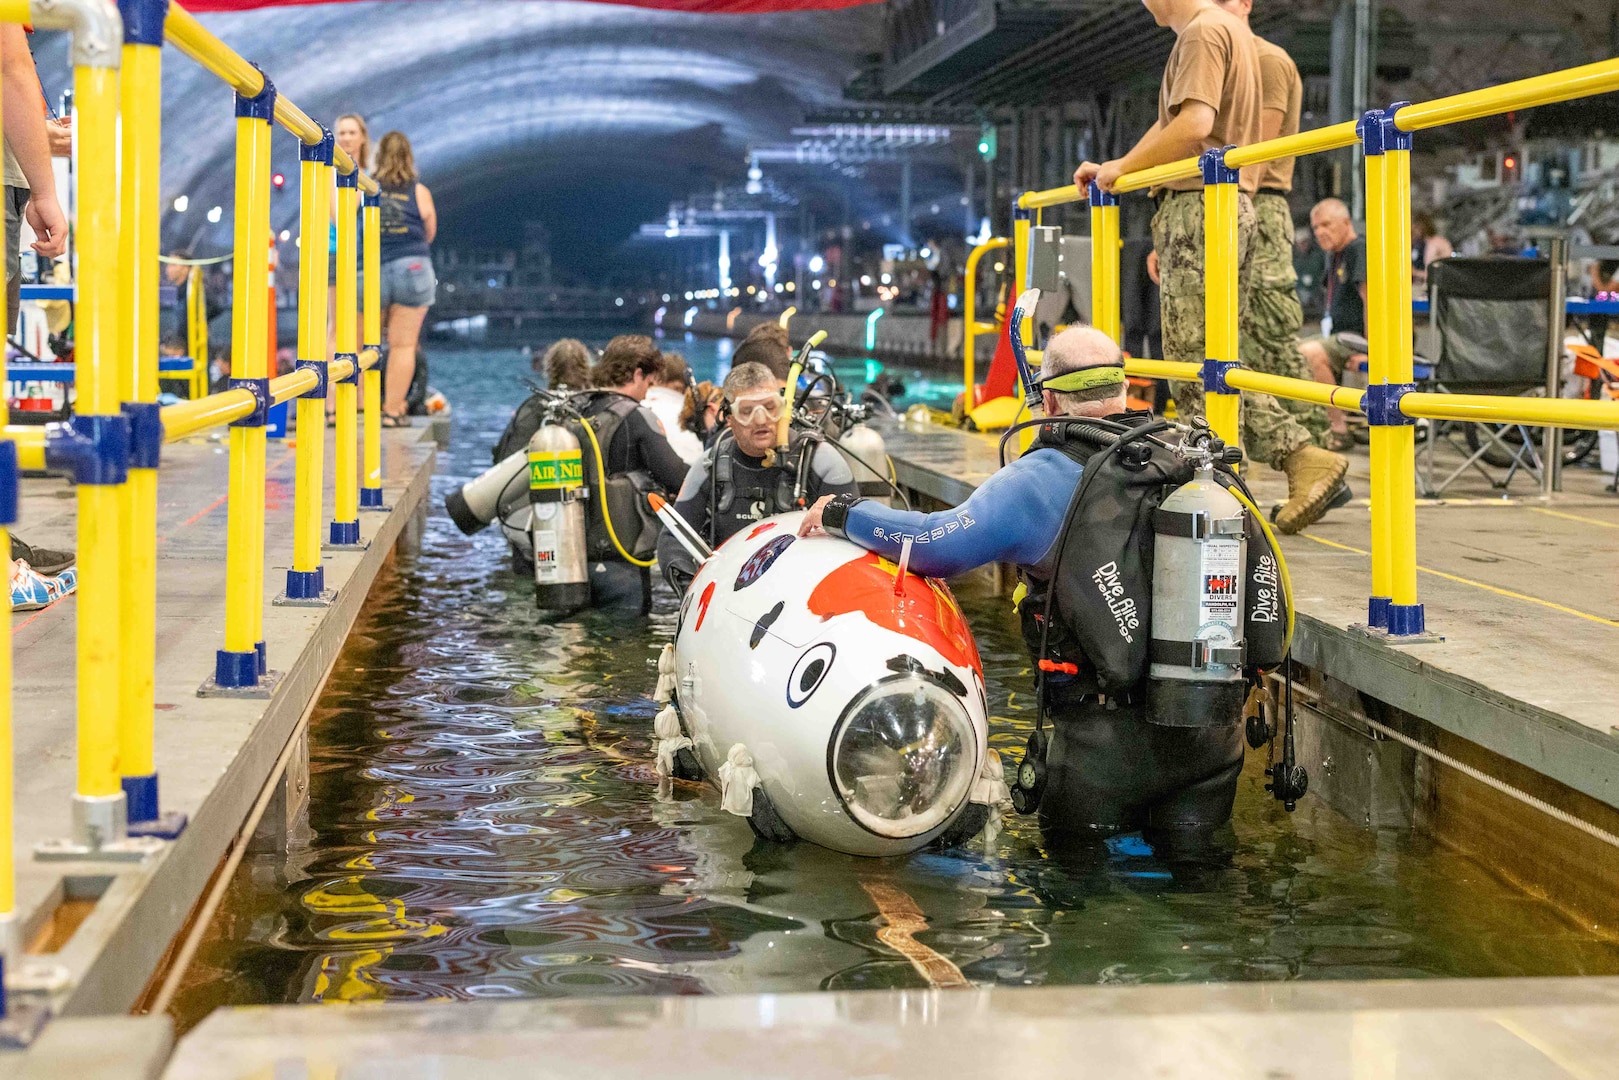 Teams enter the water at Naval Surface Warfare Center, Carderock Division's David Taylor Model Basin as they prepare for the 17th International Submarine Race in West Bethesda, Md., on June 29, 2023. (U.S. Navy photo by Aaron Thomas)